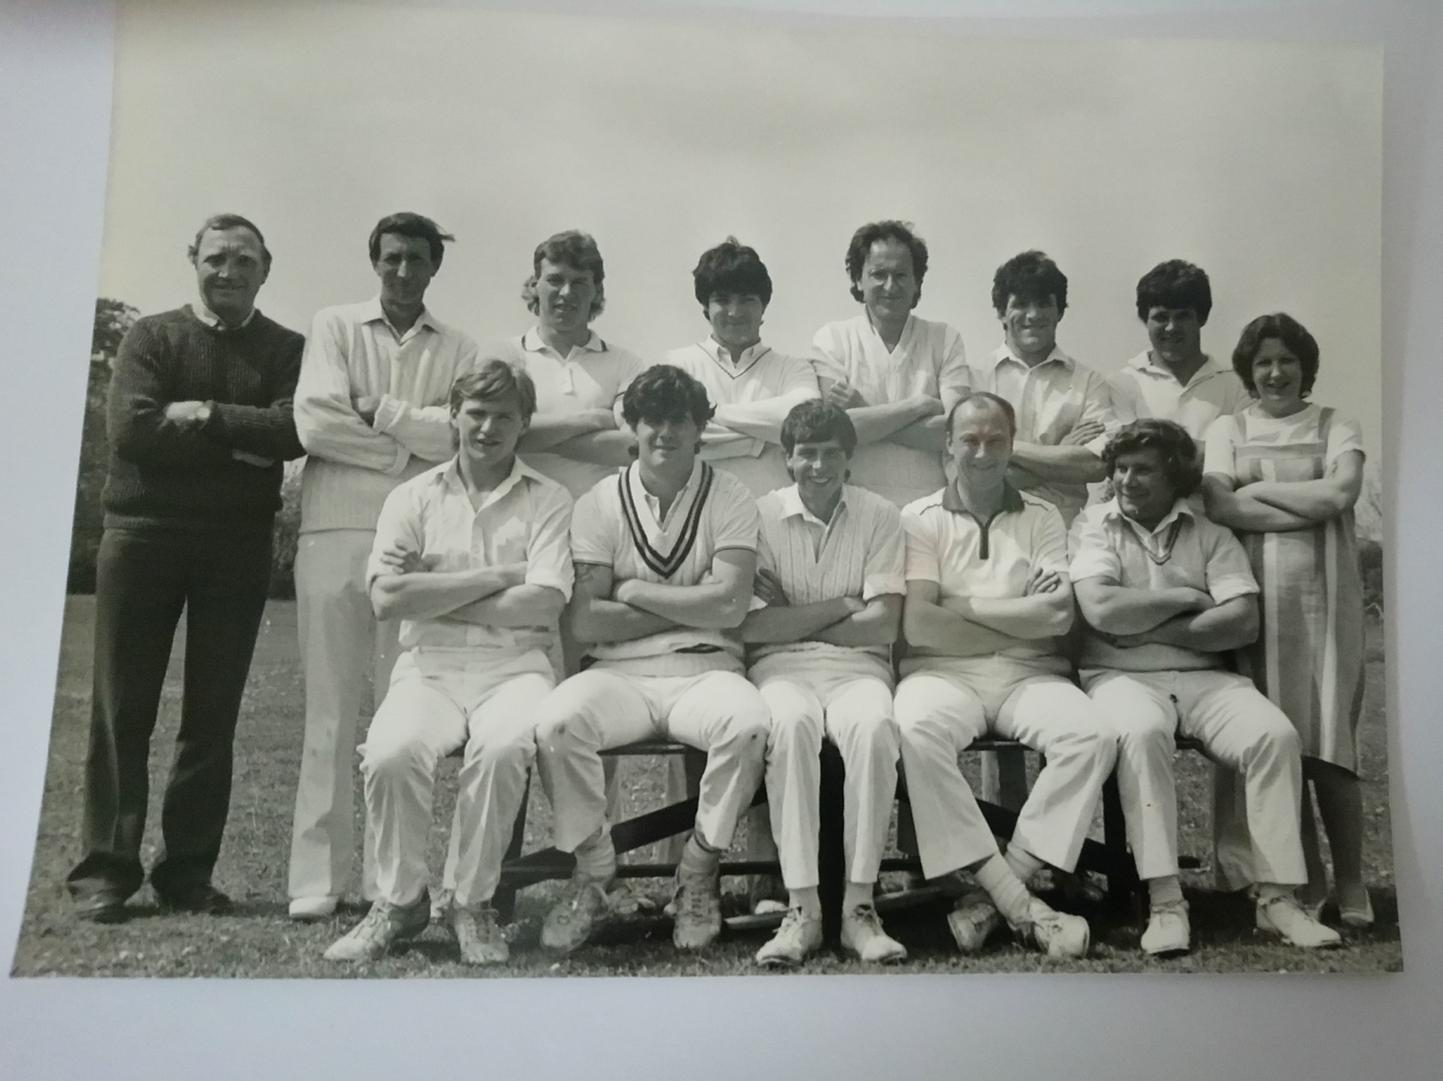 From 1984.There's a guy on the back row looks just like Eddie Gray.